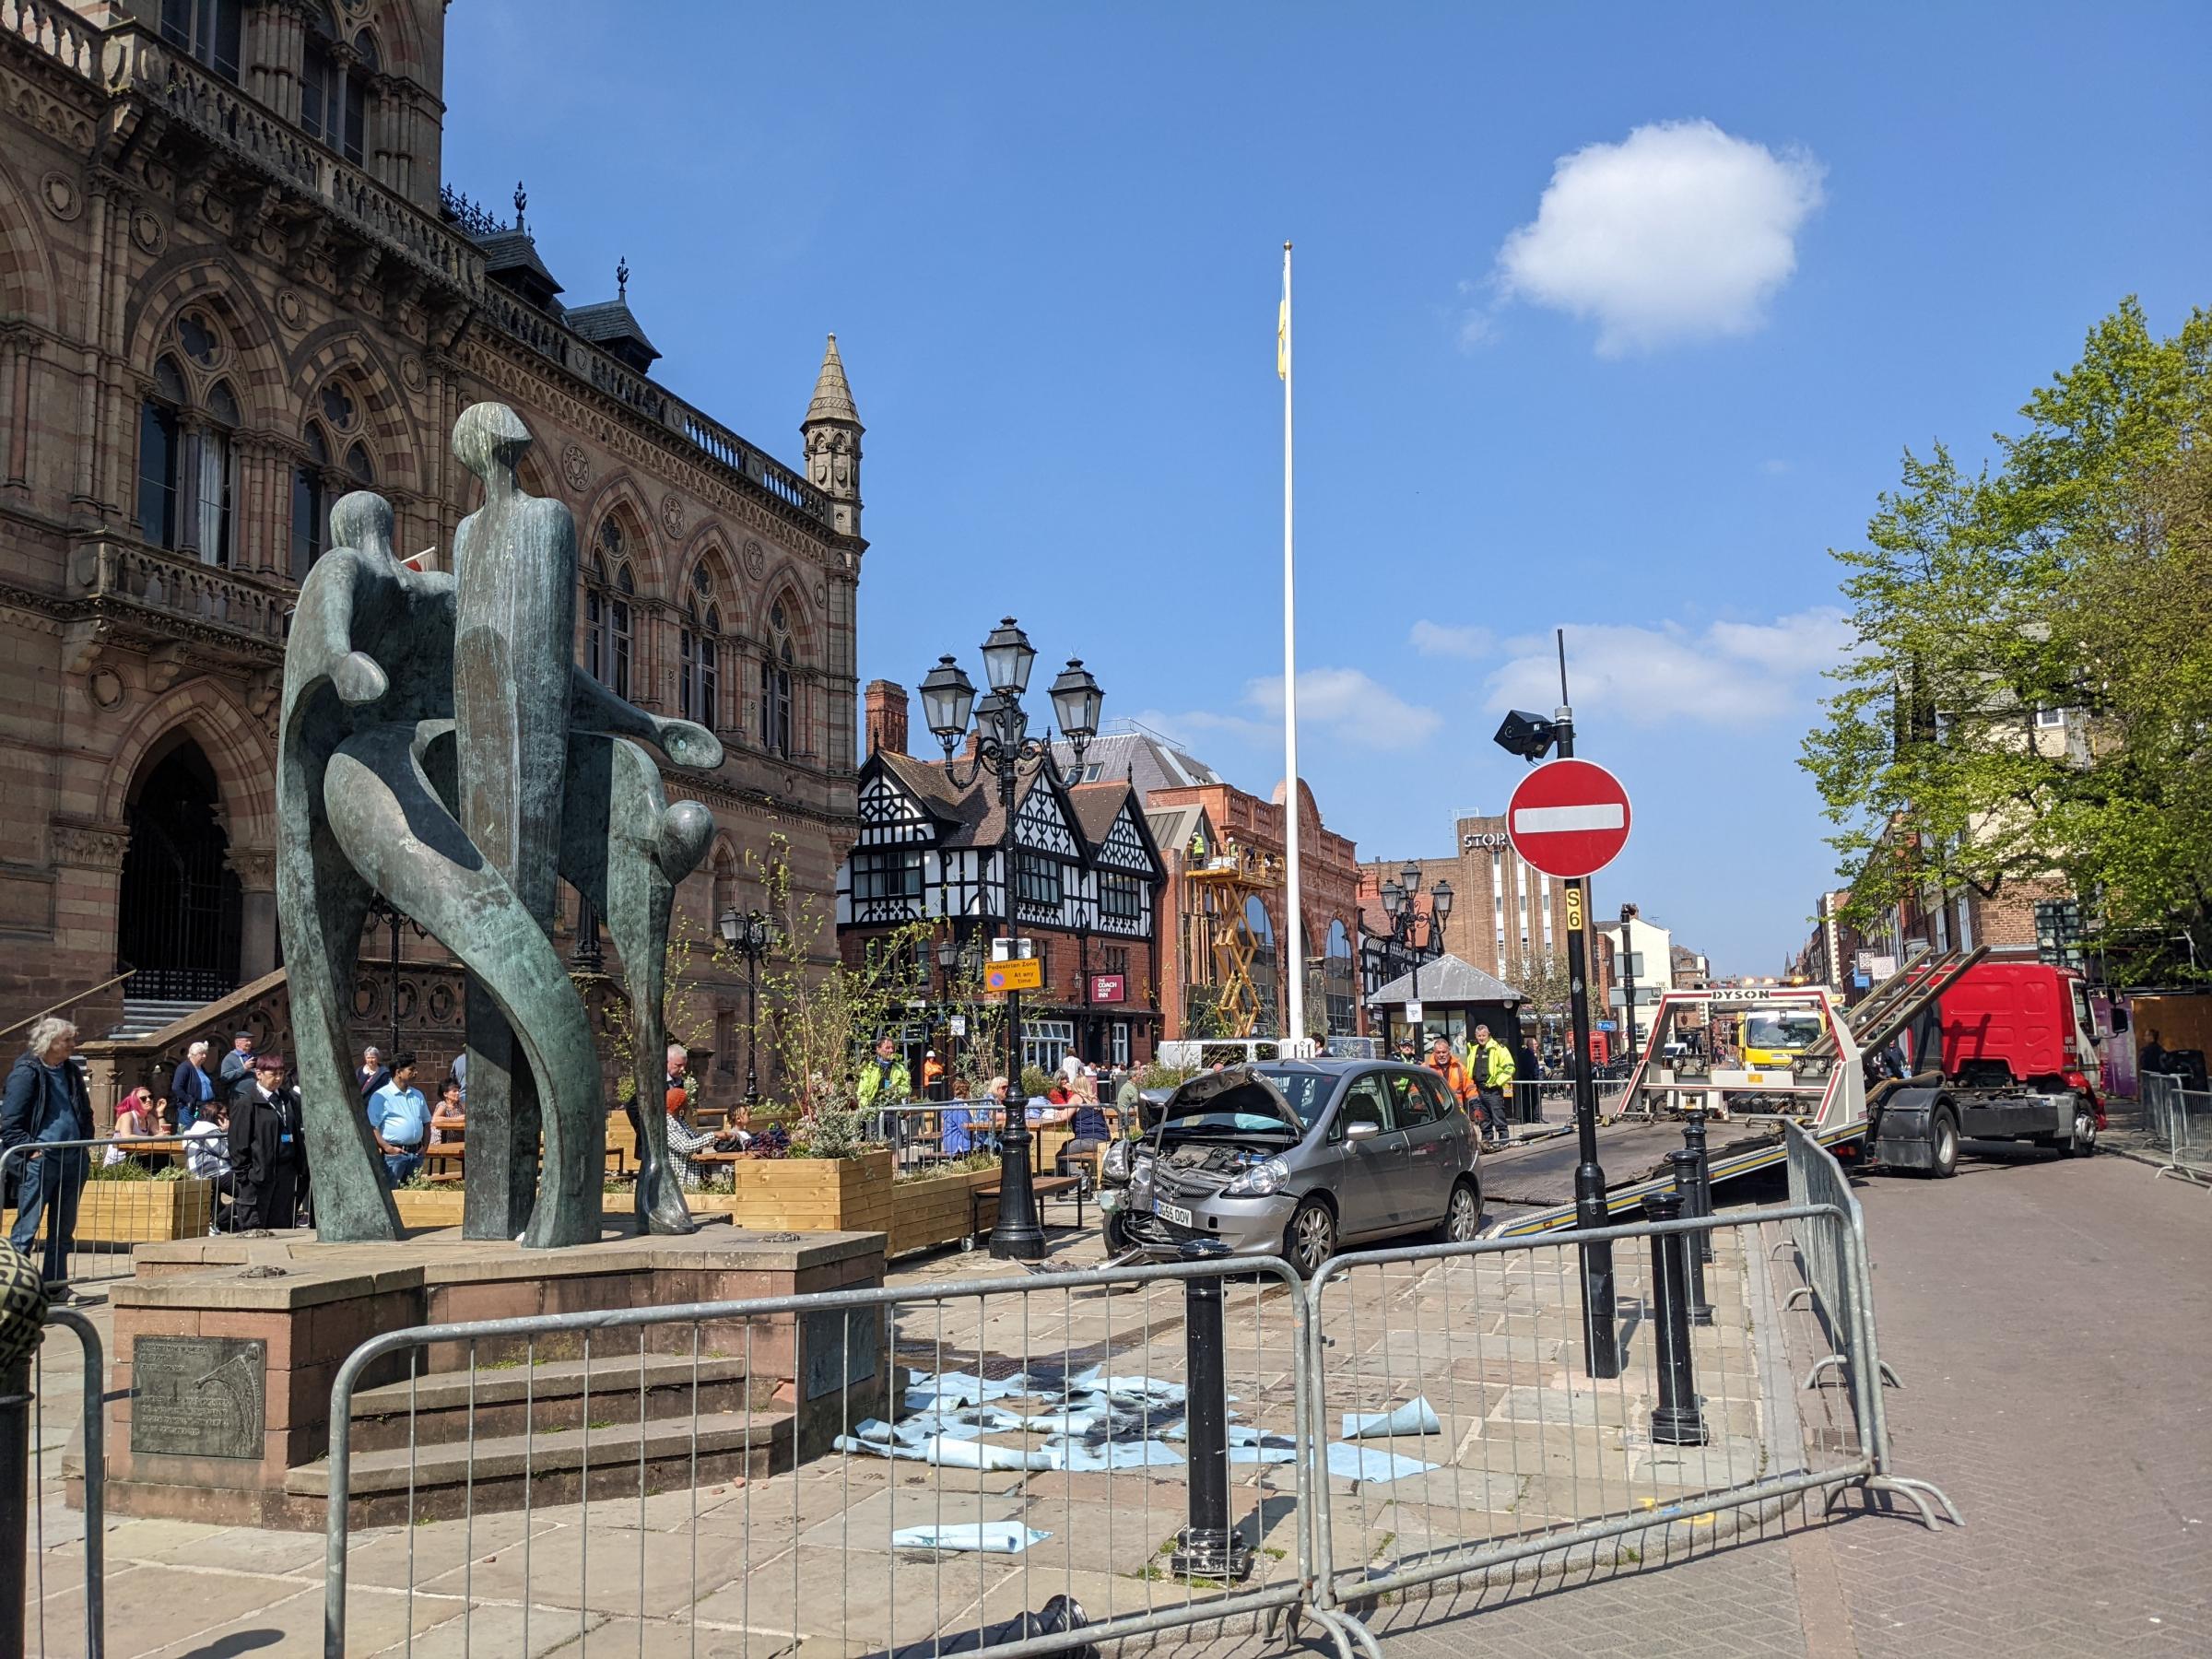 The car after it had struck the statue by Chester Town Hall.